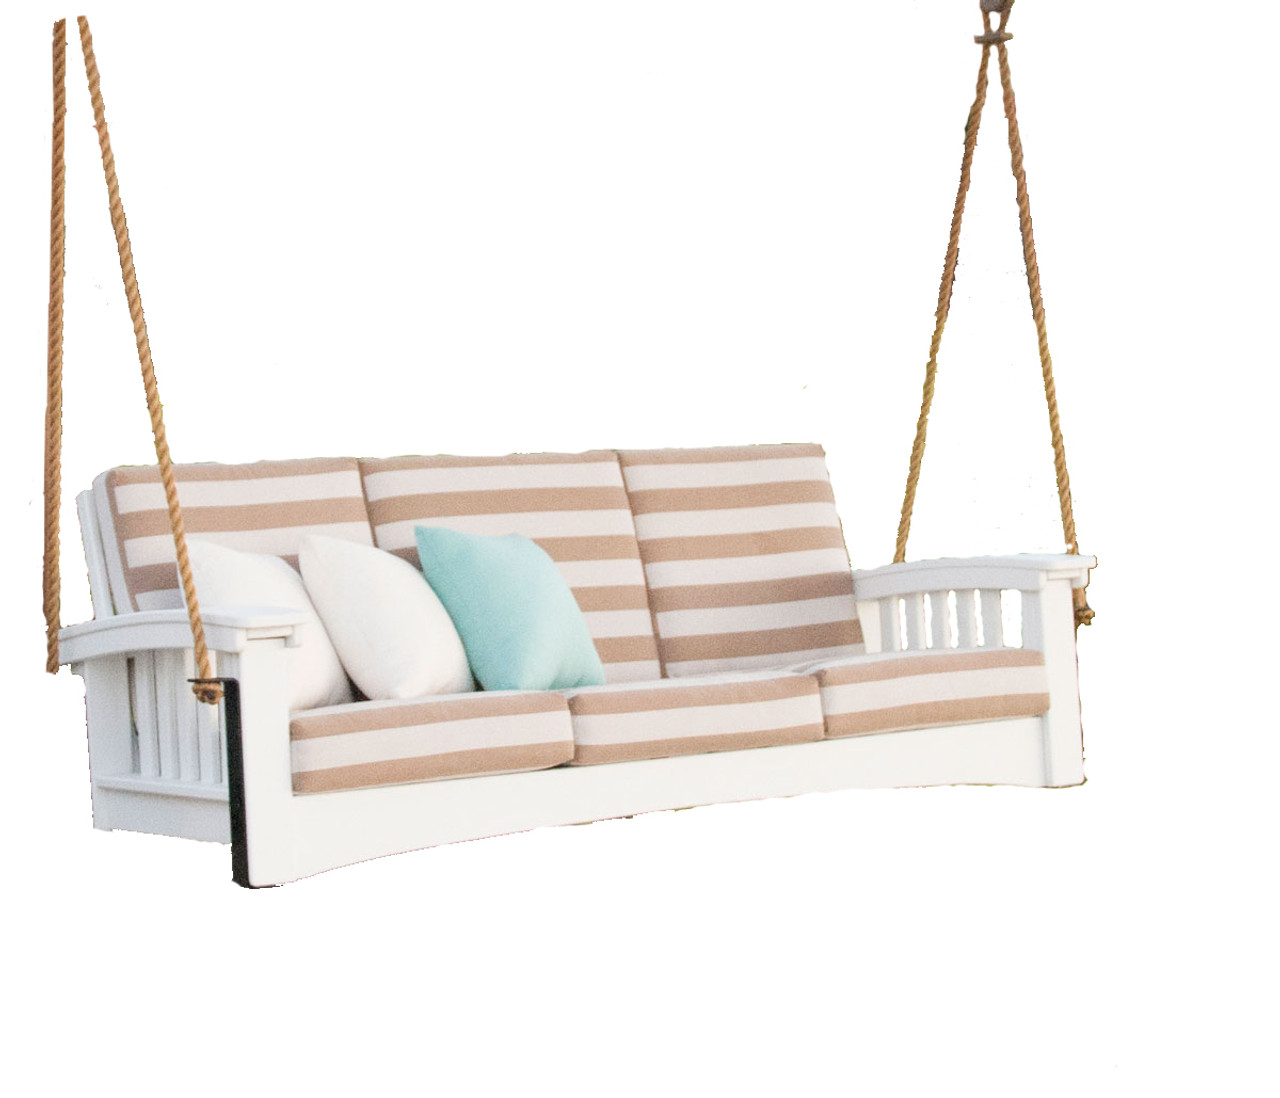 https://cdn11.bigcommerce.com/s-cghb8gf/images/stencil/1280x1280/products/535/3077/Sofa_rope_swing_White_interlaced__98577.1595971666.jpg?c=2